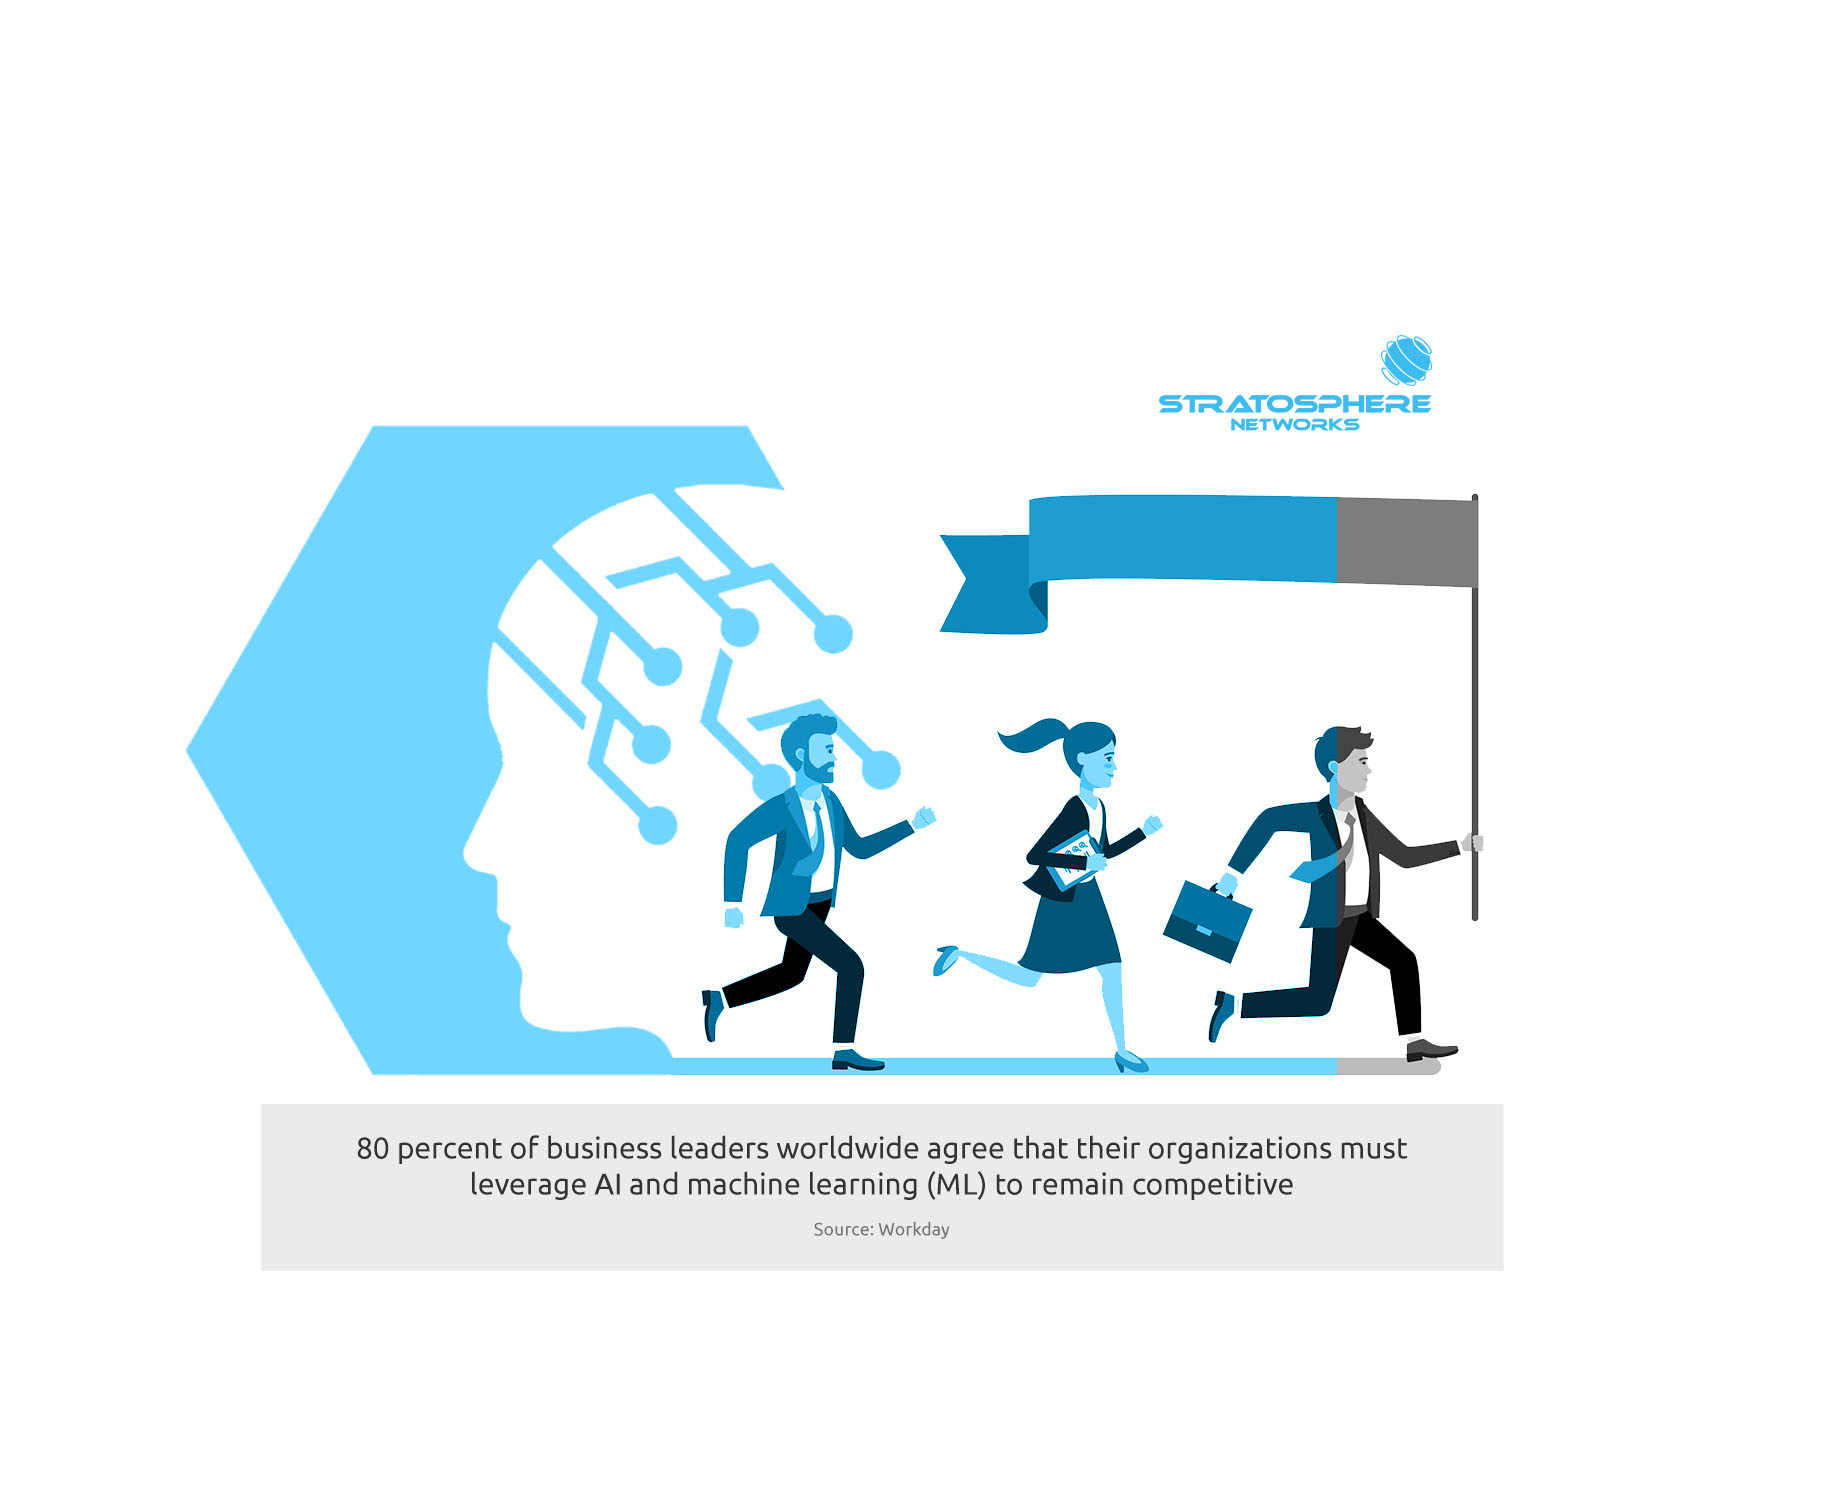 An illustration of three people in business attire running, with the person at the front holding a flag and a face in profile with circuit symbols in the background. Text below the illustration reads, "80 percent of business leaders worldwide agree that their organizations must leverage AI and machine learning (ML) to remain competitive (Source: Workday)."